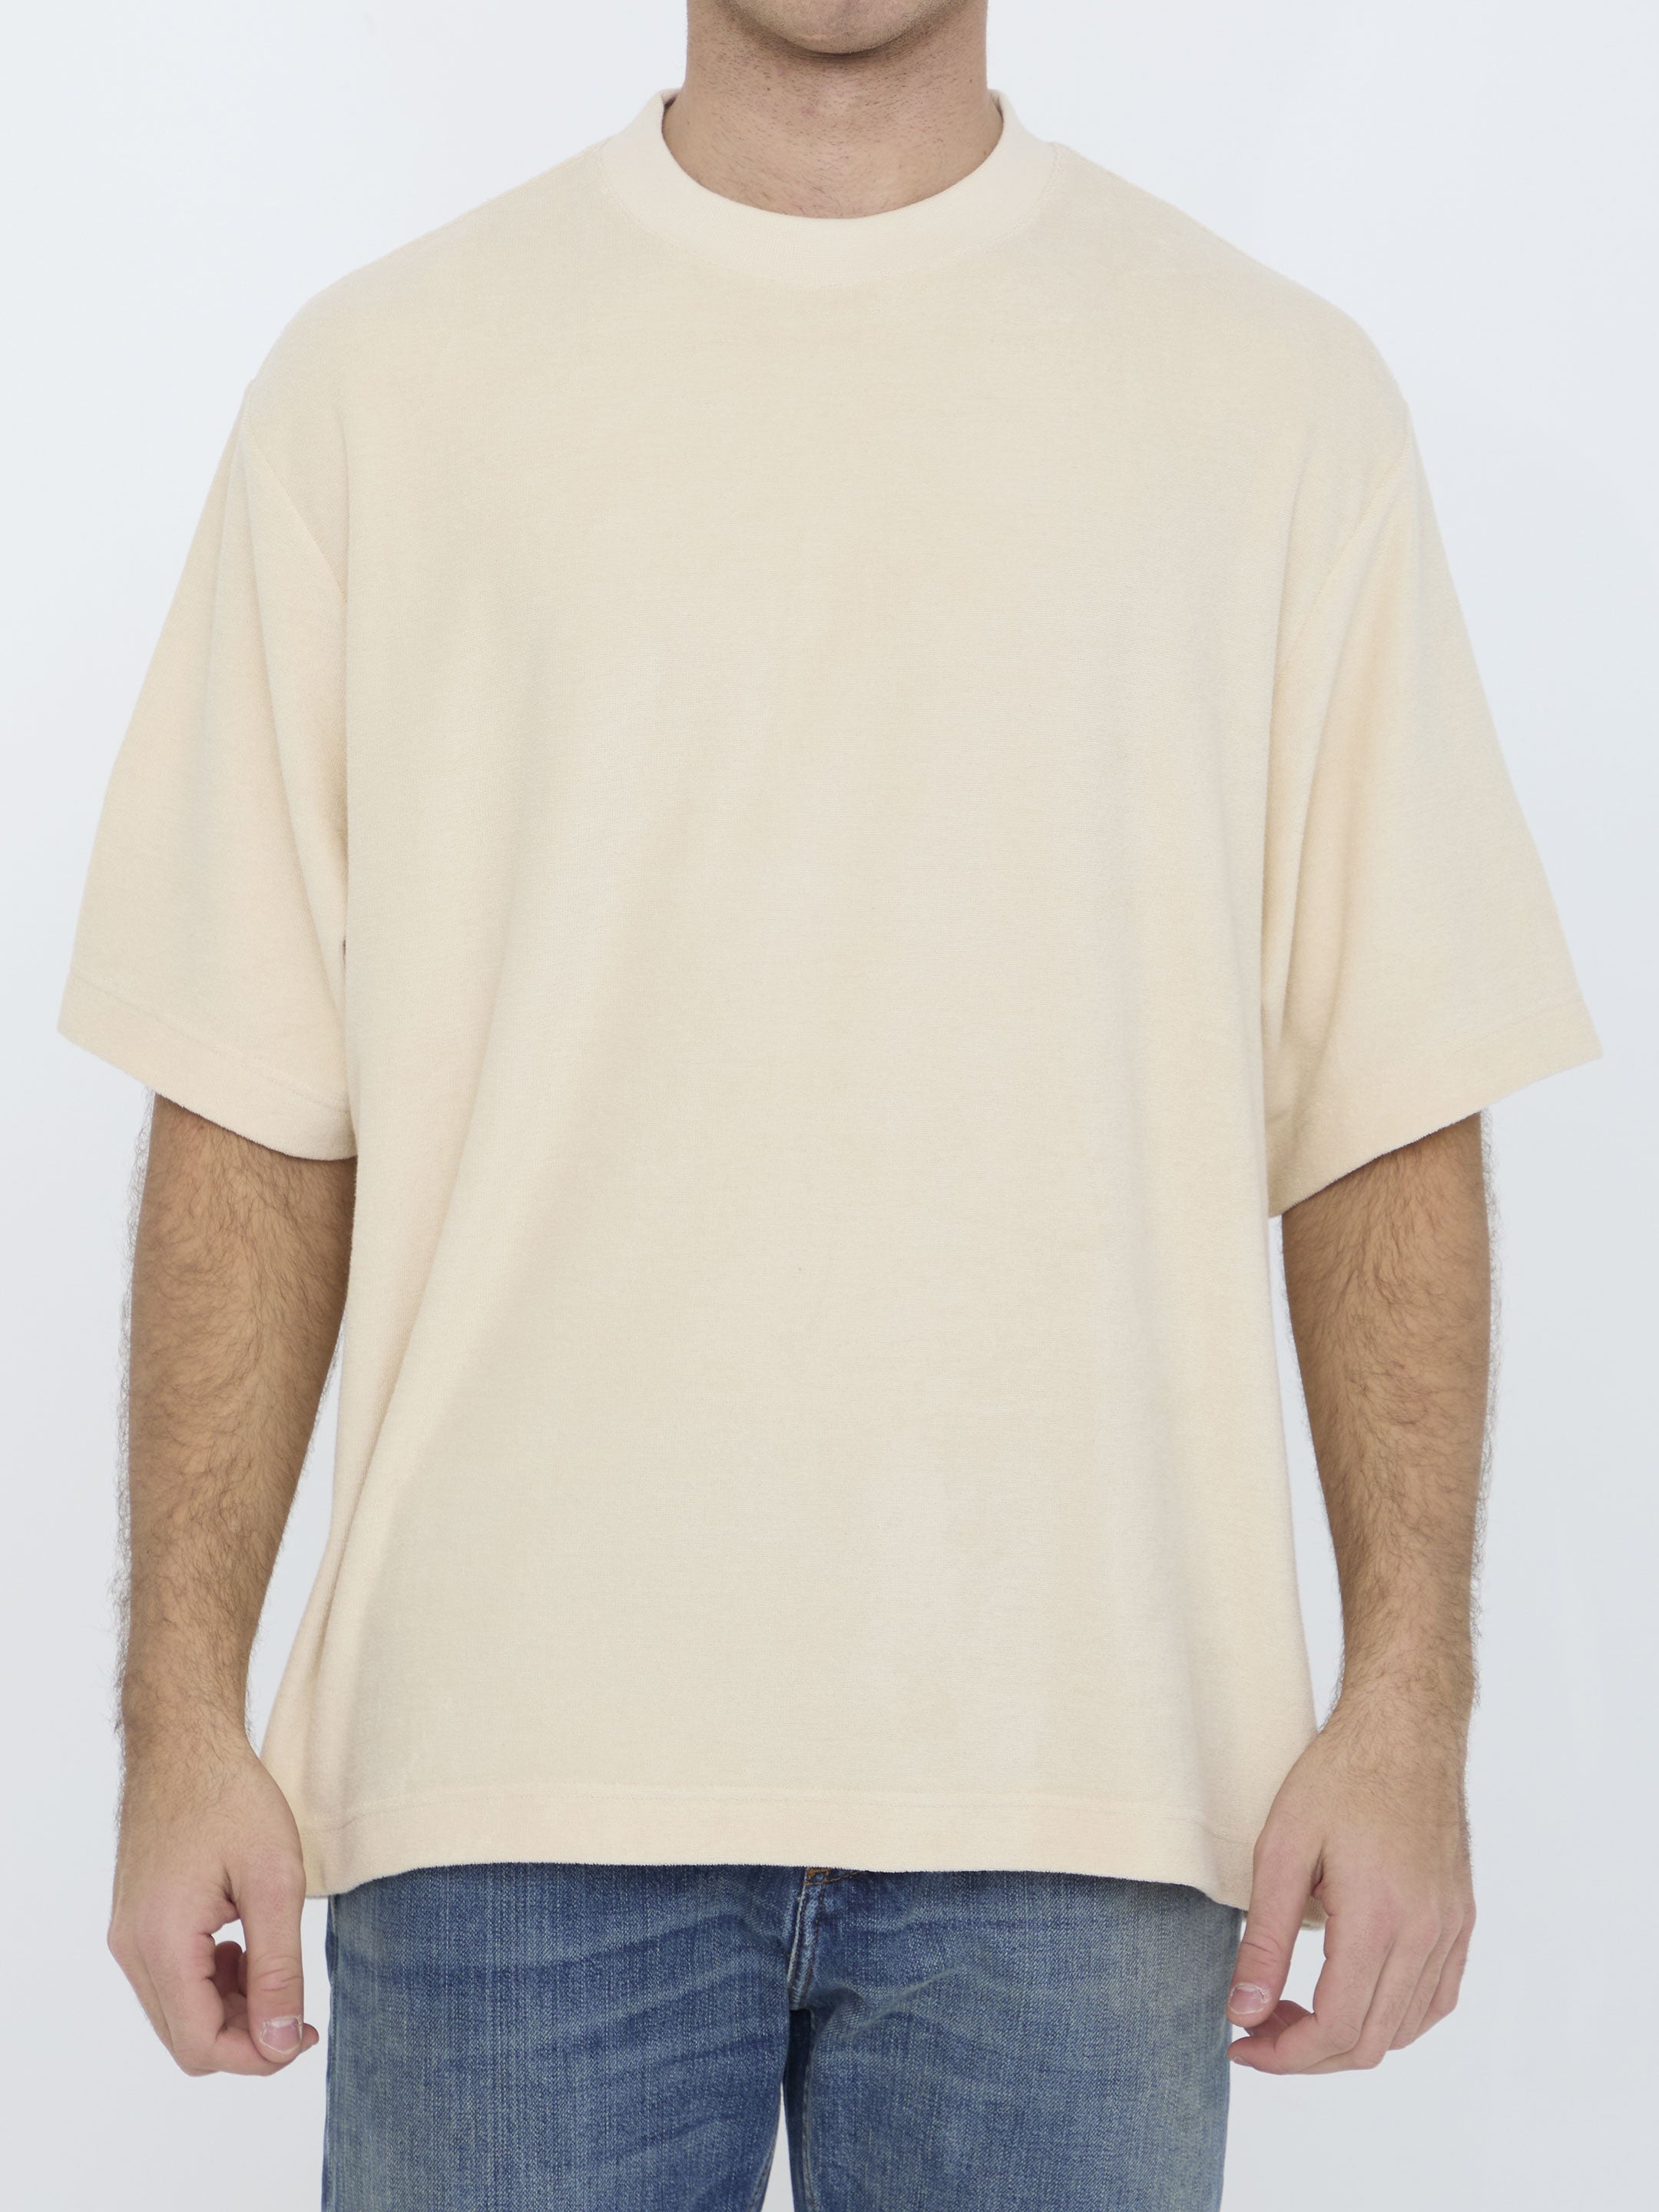 BURBERRY-OUTLET-SALE-Cotton-towelling-t-shirt-Shirts-L-BEIGE-ARCHIVE-COLLECTION.jpg